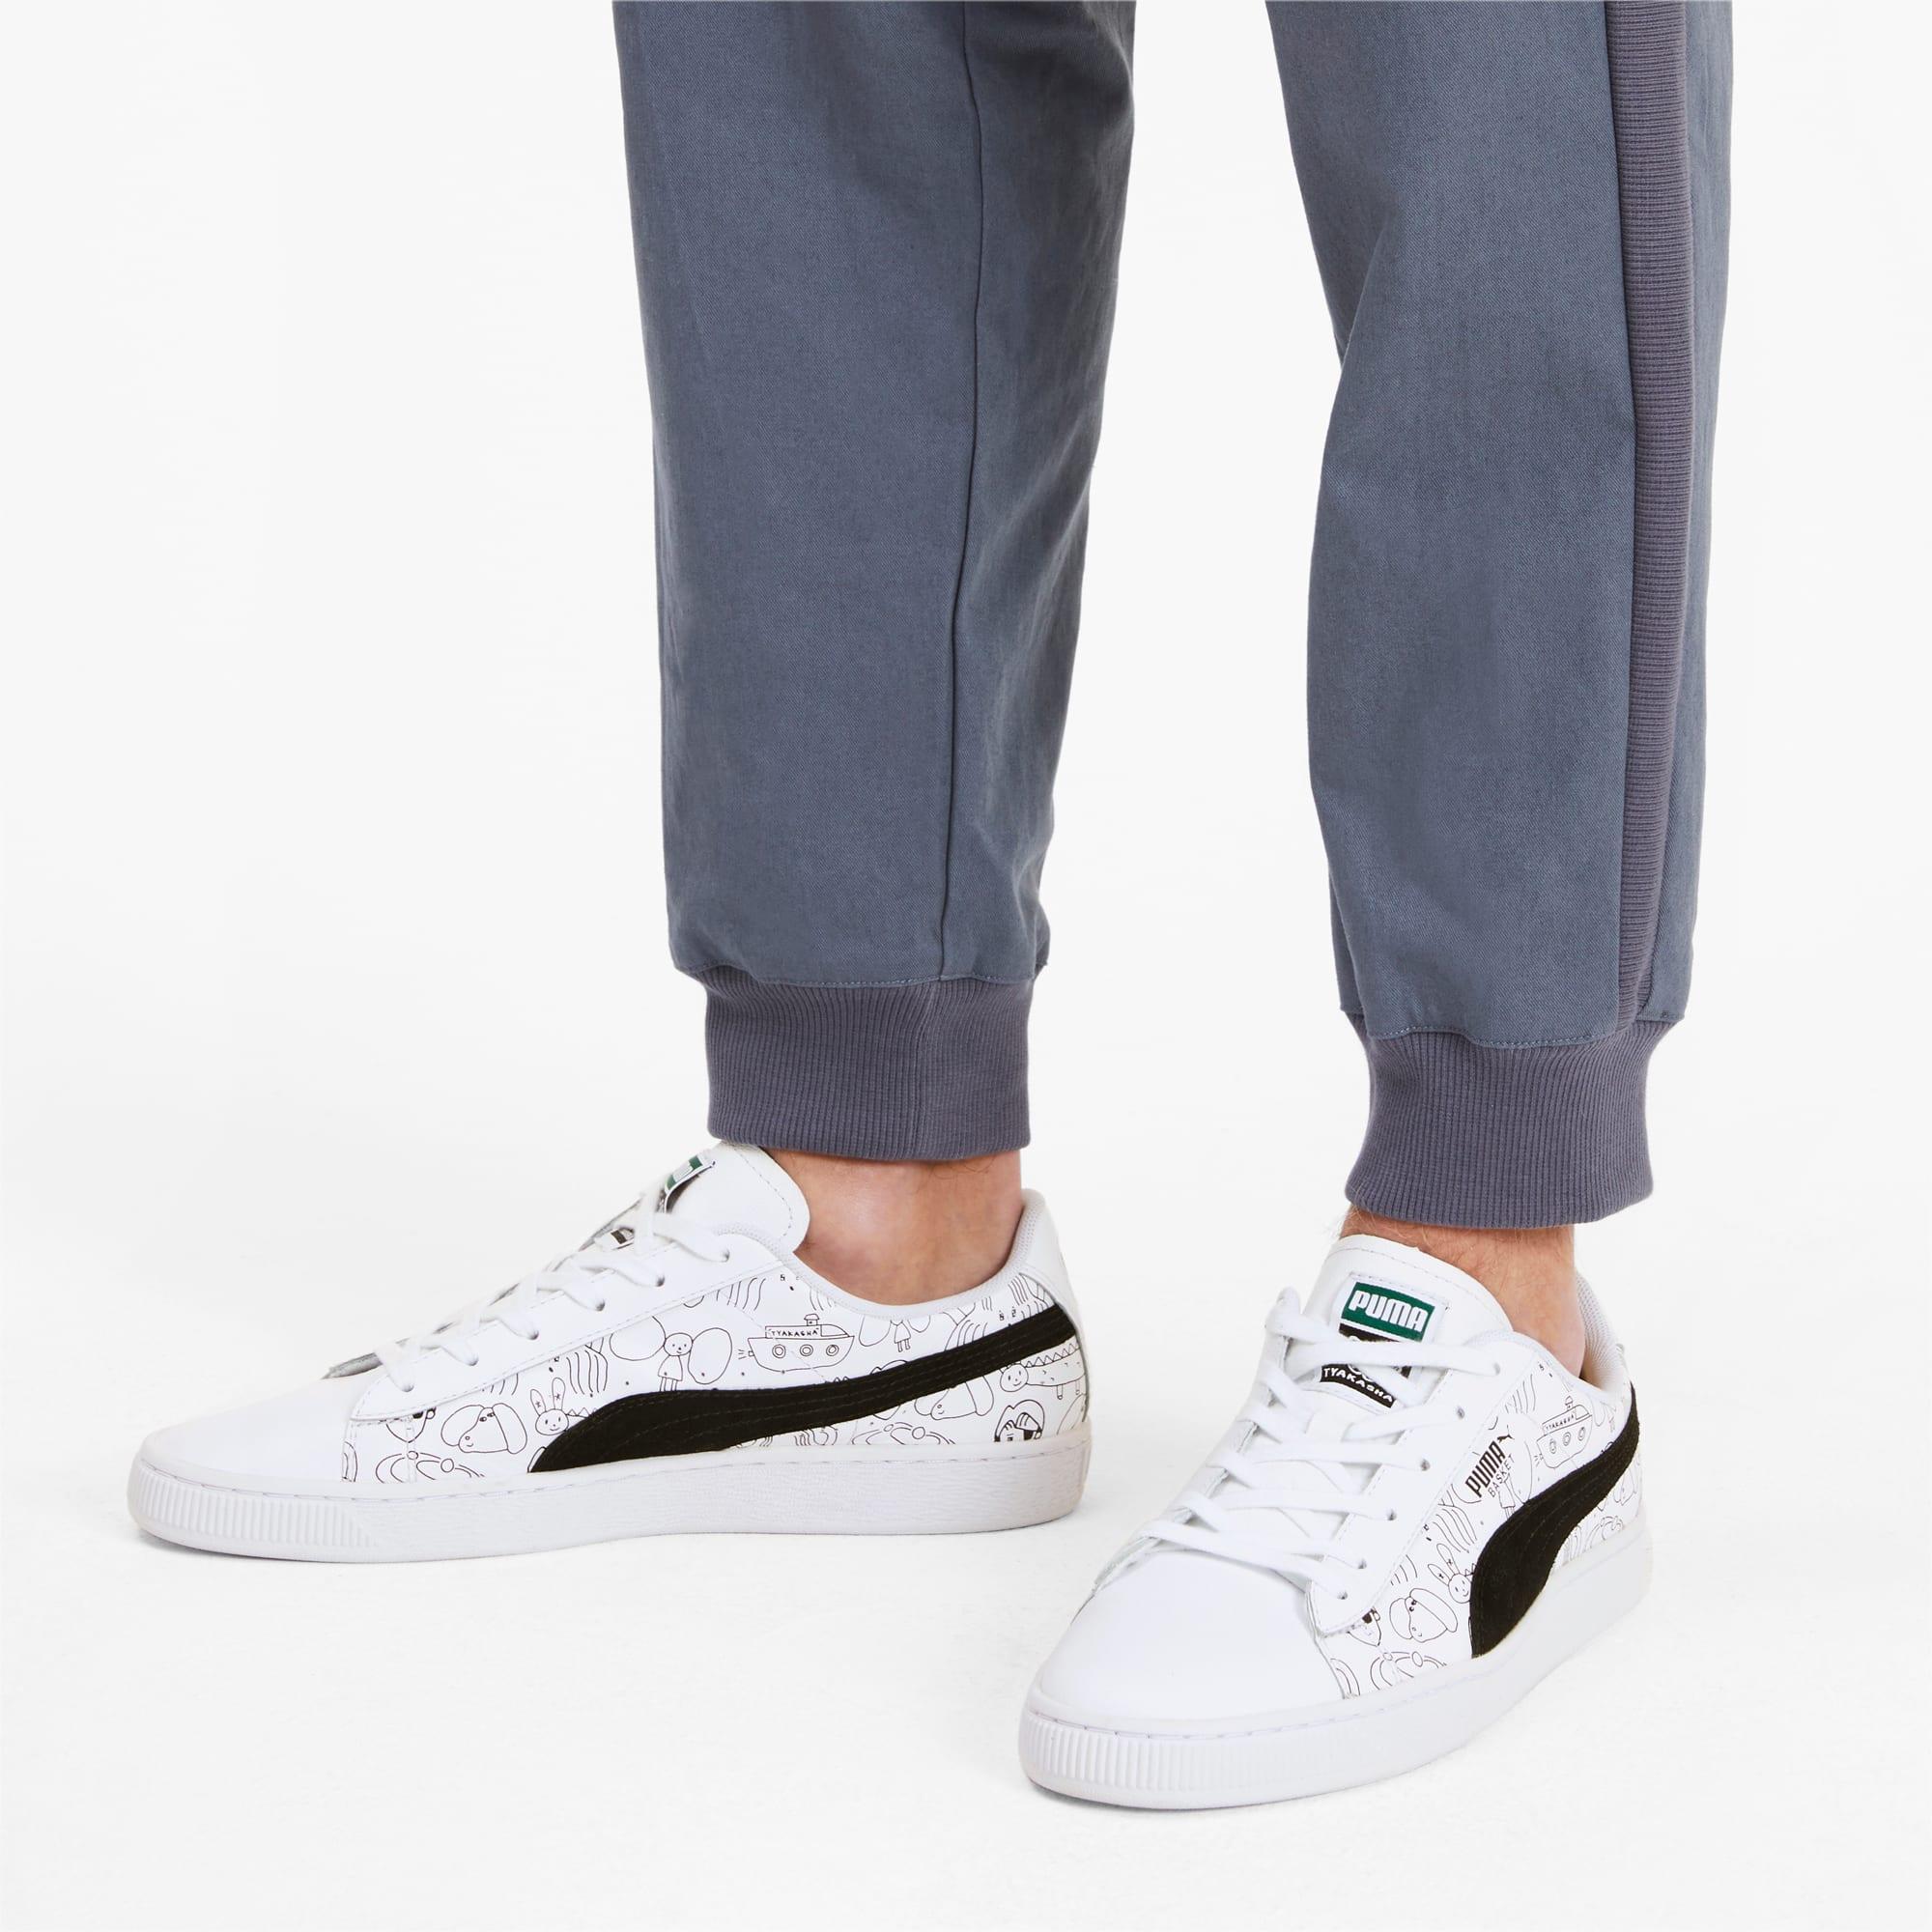 PUMA Leather X Tyakasha Basket Sneakers in White - Save 31% - Lyst